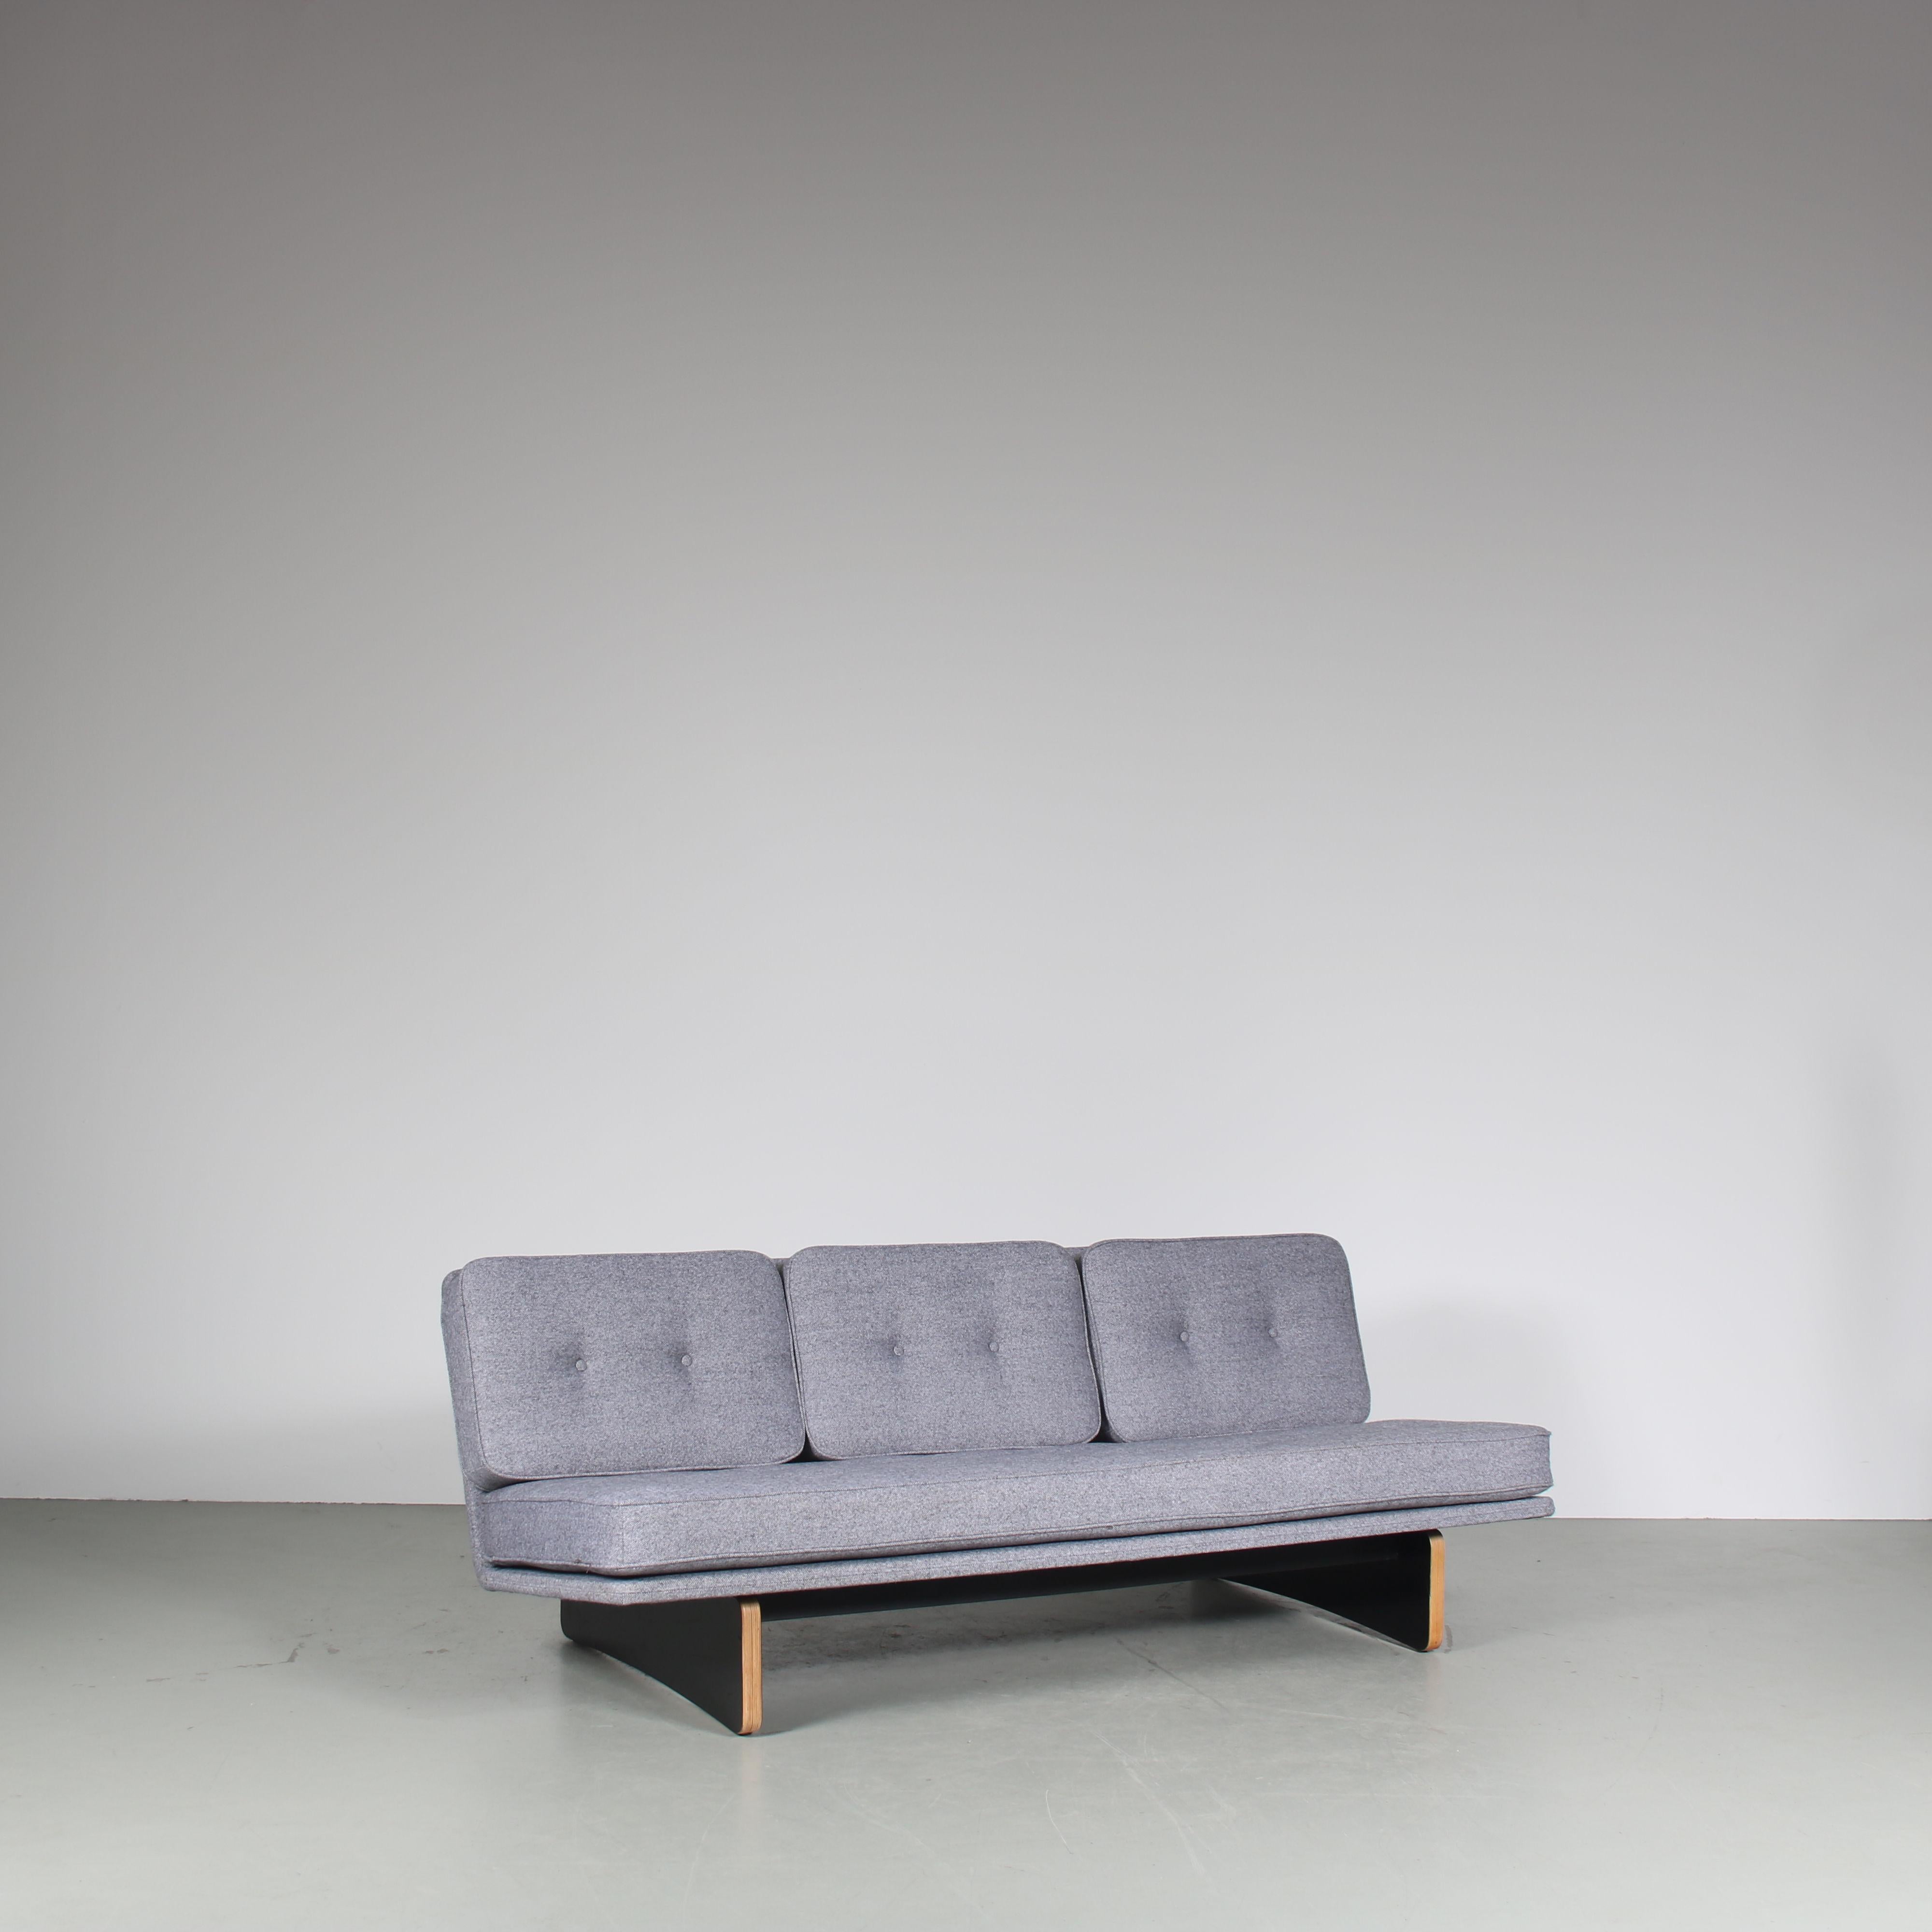 A stunning 3-seater sofa designed by Kho Liang Ie and manufactured by Artifort around 1970.

This modern piece embodies a perfect fusion of style, comfort, and craftsmanship. With its sleek lines, wooden base, and fresh blue-gray upholstery, this